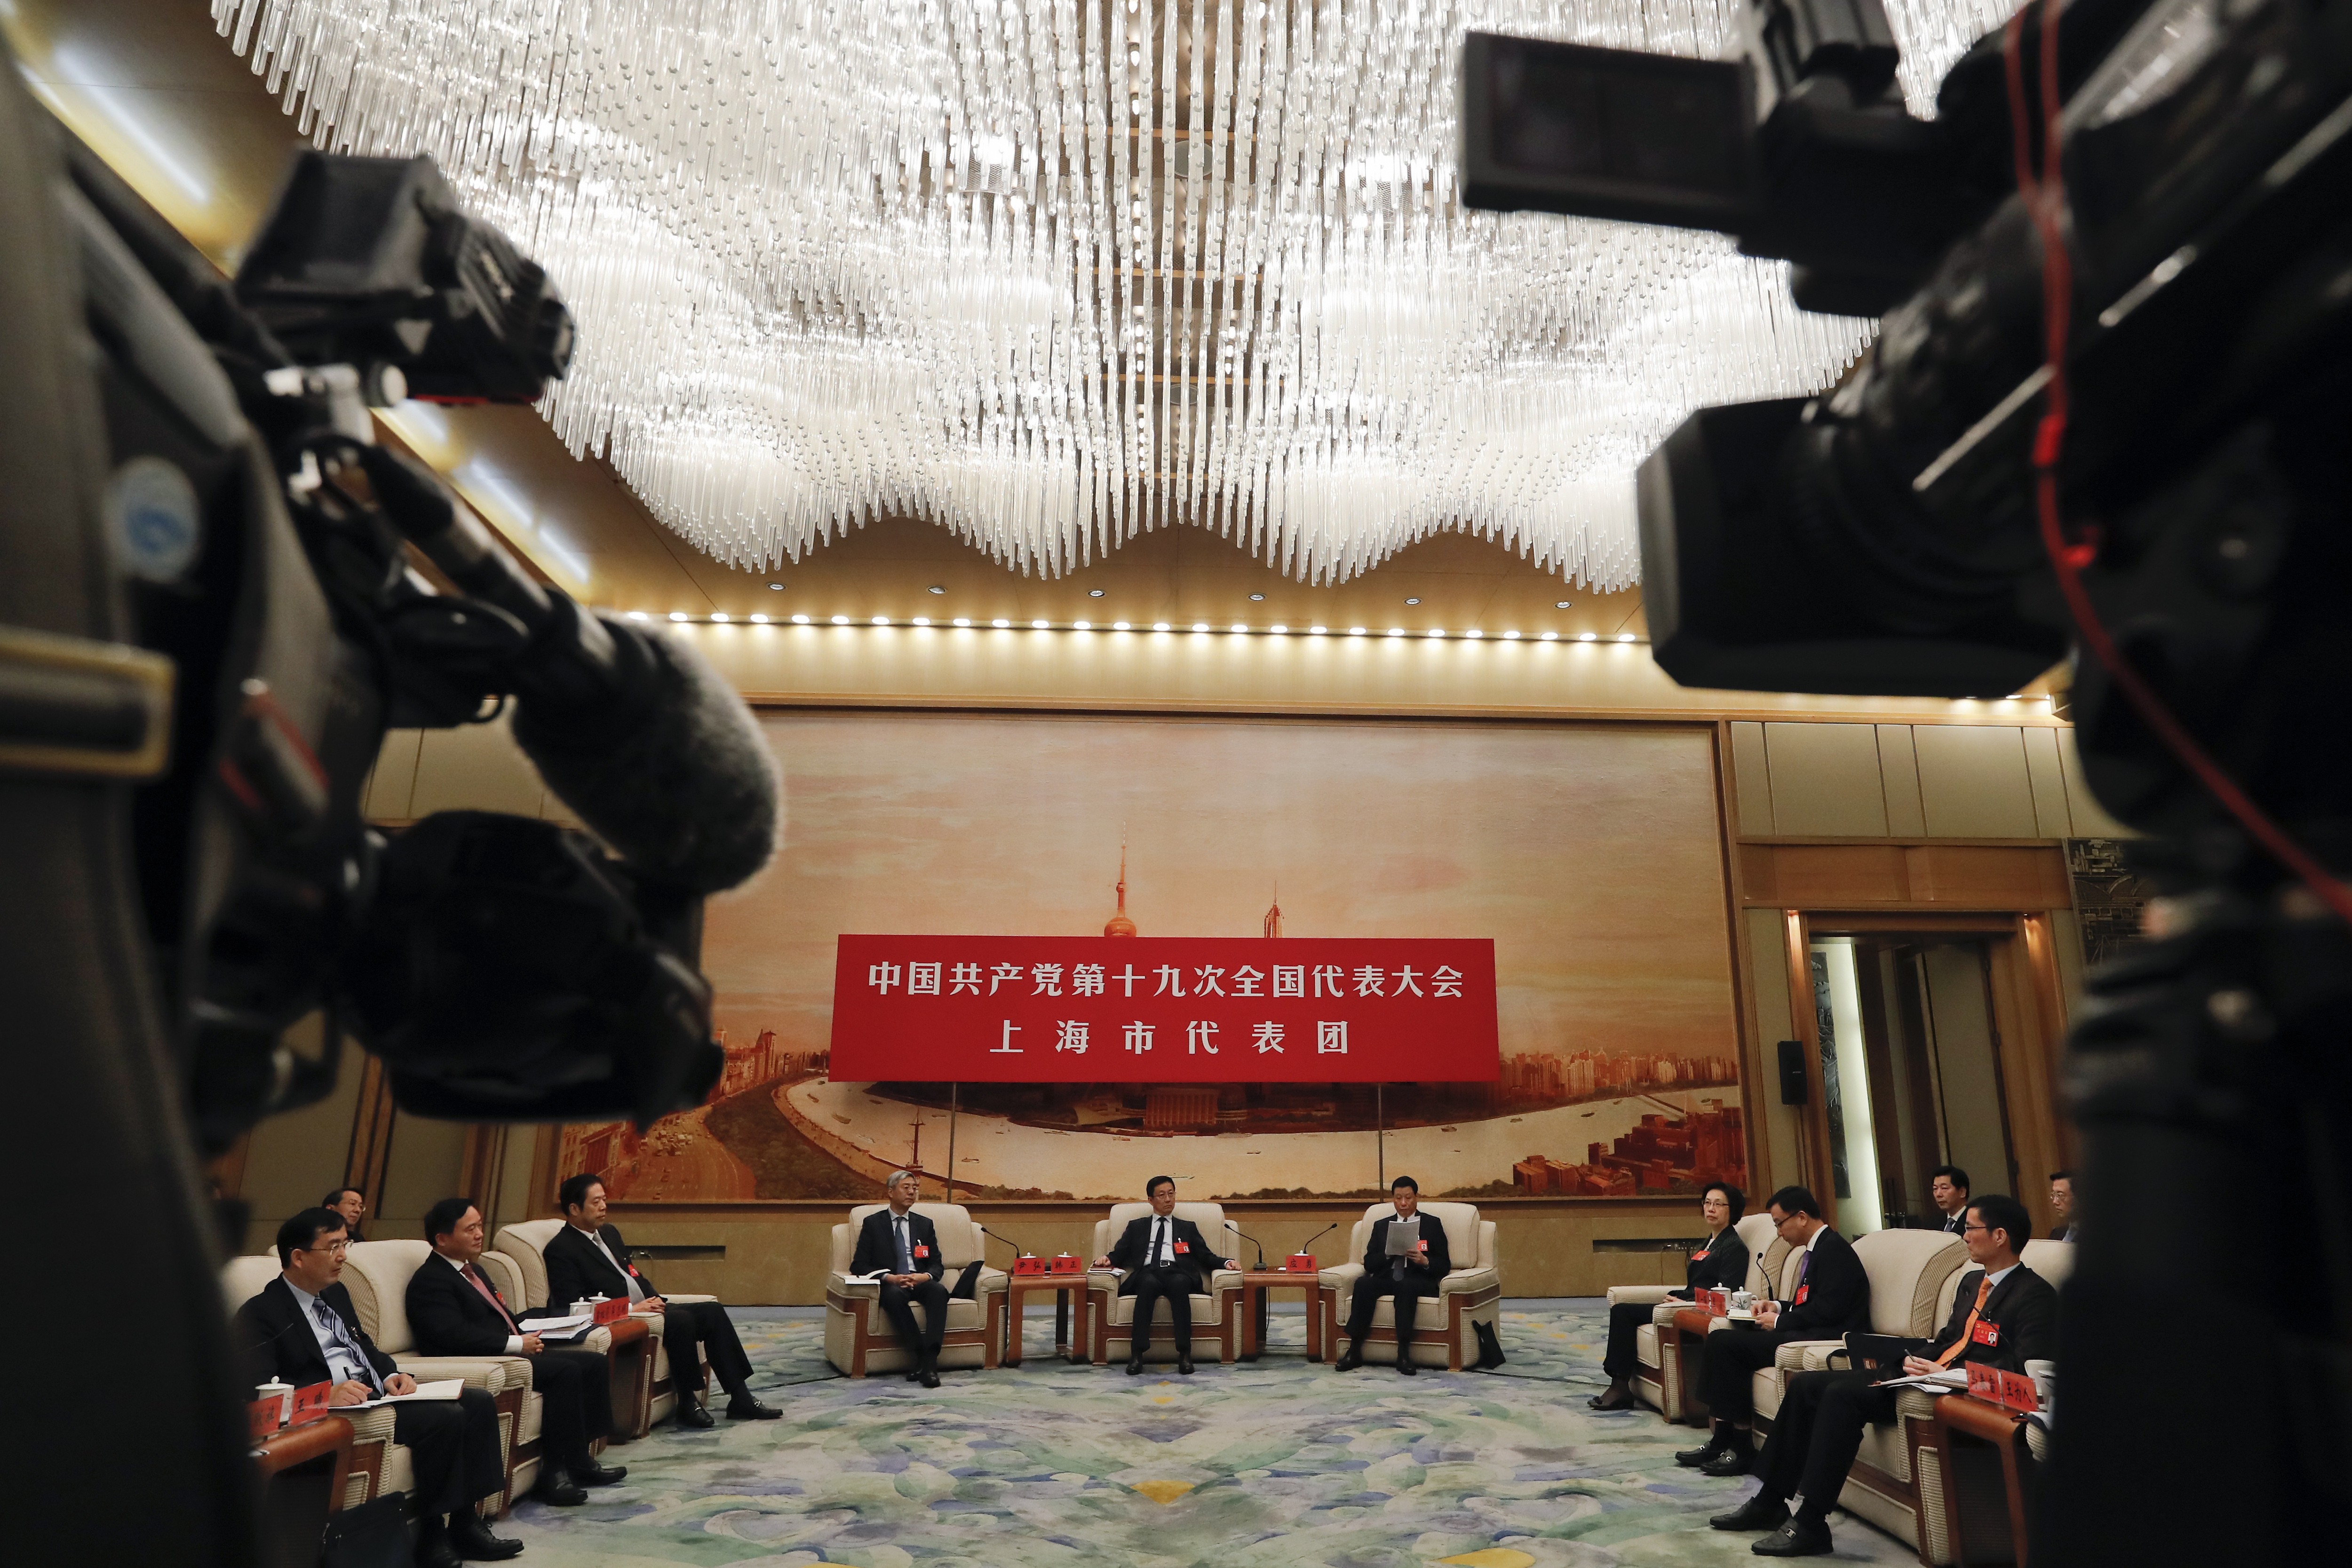 The Shanghai delegation, including party chief Han Zheng (centre) and mayor Ying Yong (right) discuss Xi Jinping’s work report at the Great Hall of the People in Beijing on Thursday. Photo: AP